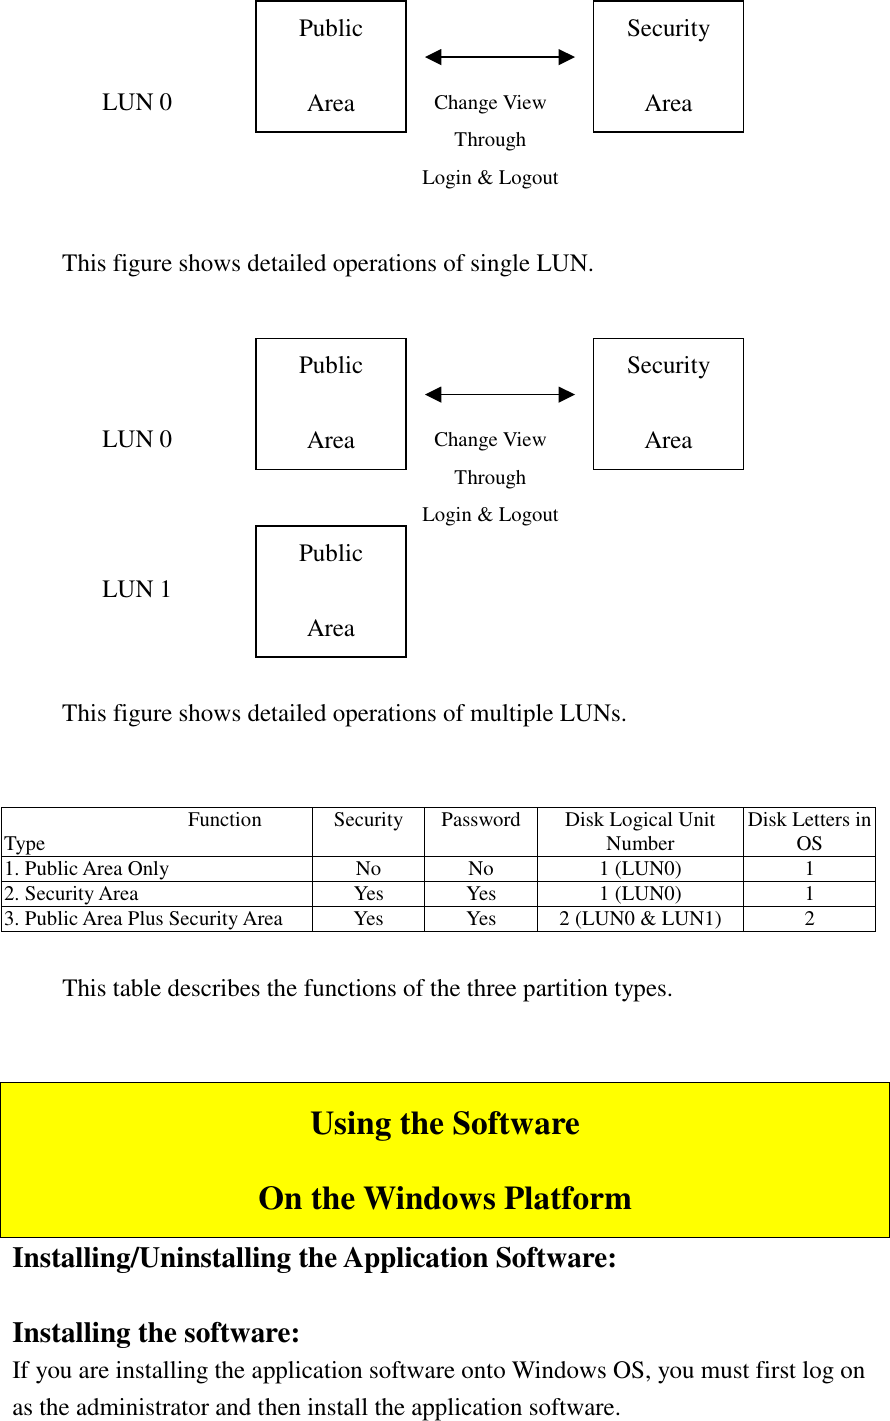      This figure shows detailed operations of single LUN.     This figure shows detailed operations of multiple LUNs.                       Function Type  Security Password  Disk Logical Unit Number   Disk Letters in OS 1. Public Area Only  No  No  1 (LUN0)  1 2. Security Area  Yes  Yes  1 (LUN0)  1 3. Public Area Plus Security Area  Yes  Yes  2 (LUN0 &amp; LUN1)  2     This table describes the functions of the three partition types.   Using the Software On the Windows Platform Installing/Uninstalling the Application Software:  Installing the software: If you are installing the application software onto Windows OS, you must first log on as the administrator and then install the application software. Public  Area Security  Area Public  Area Change View Through Login &amp; Logout LUN 0 LUN 1 Public  Area Security  Area Change View Through Login &amp; Logout LUN 0 